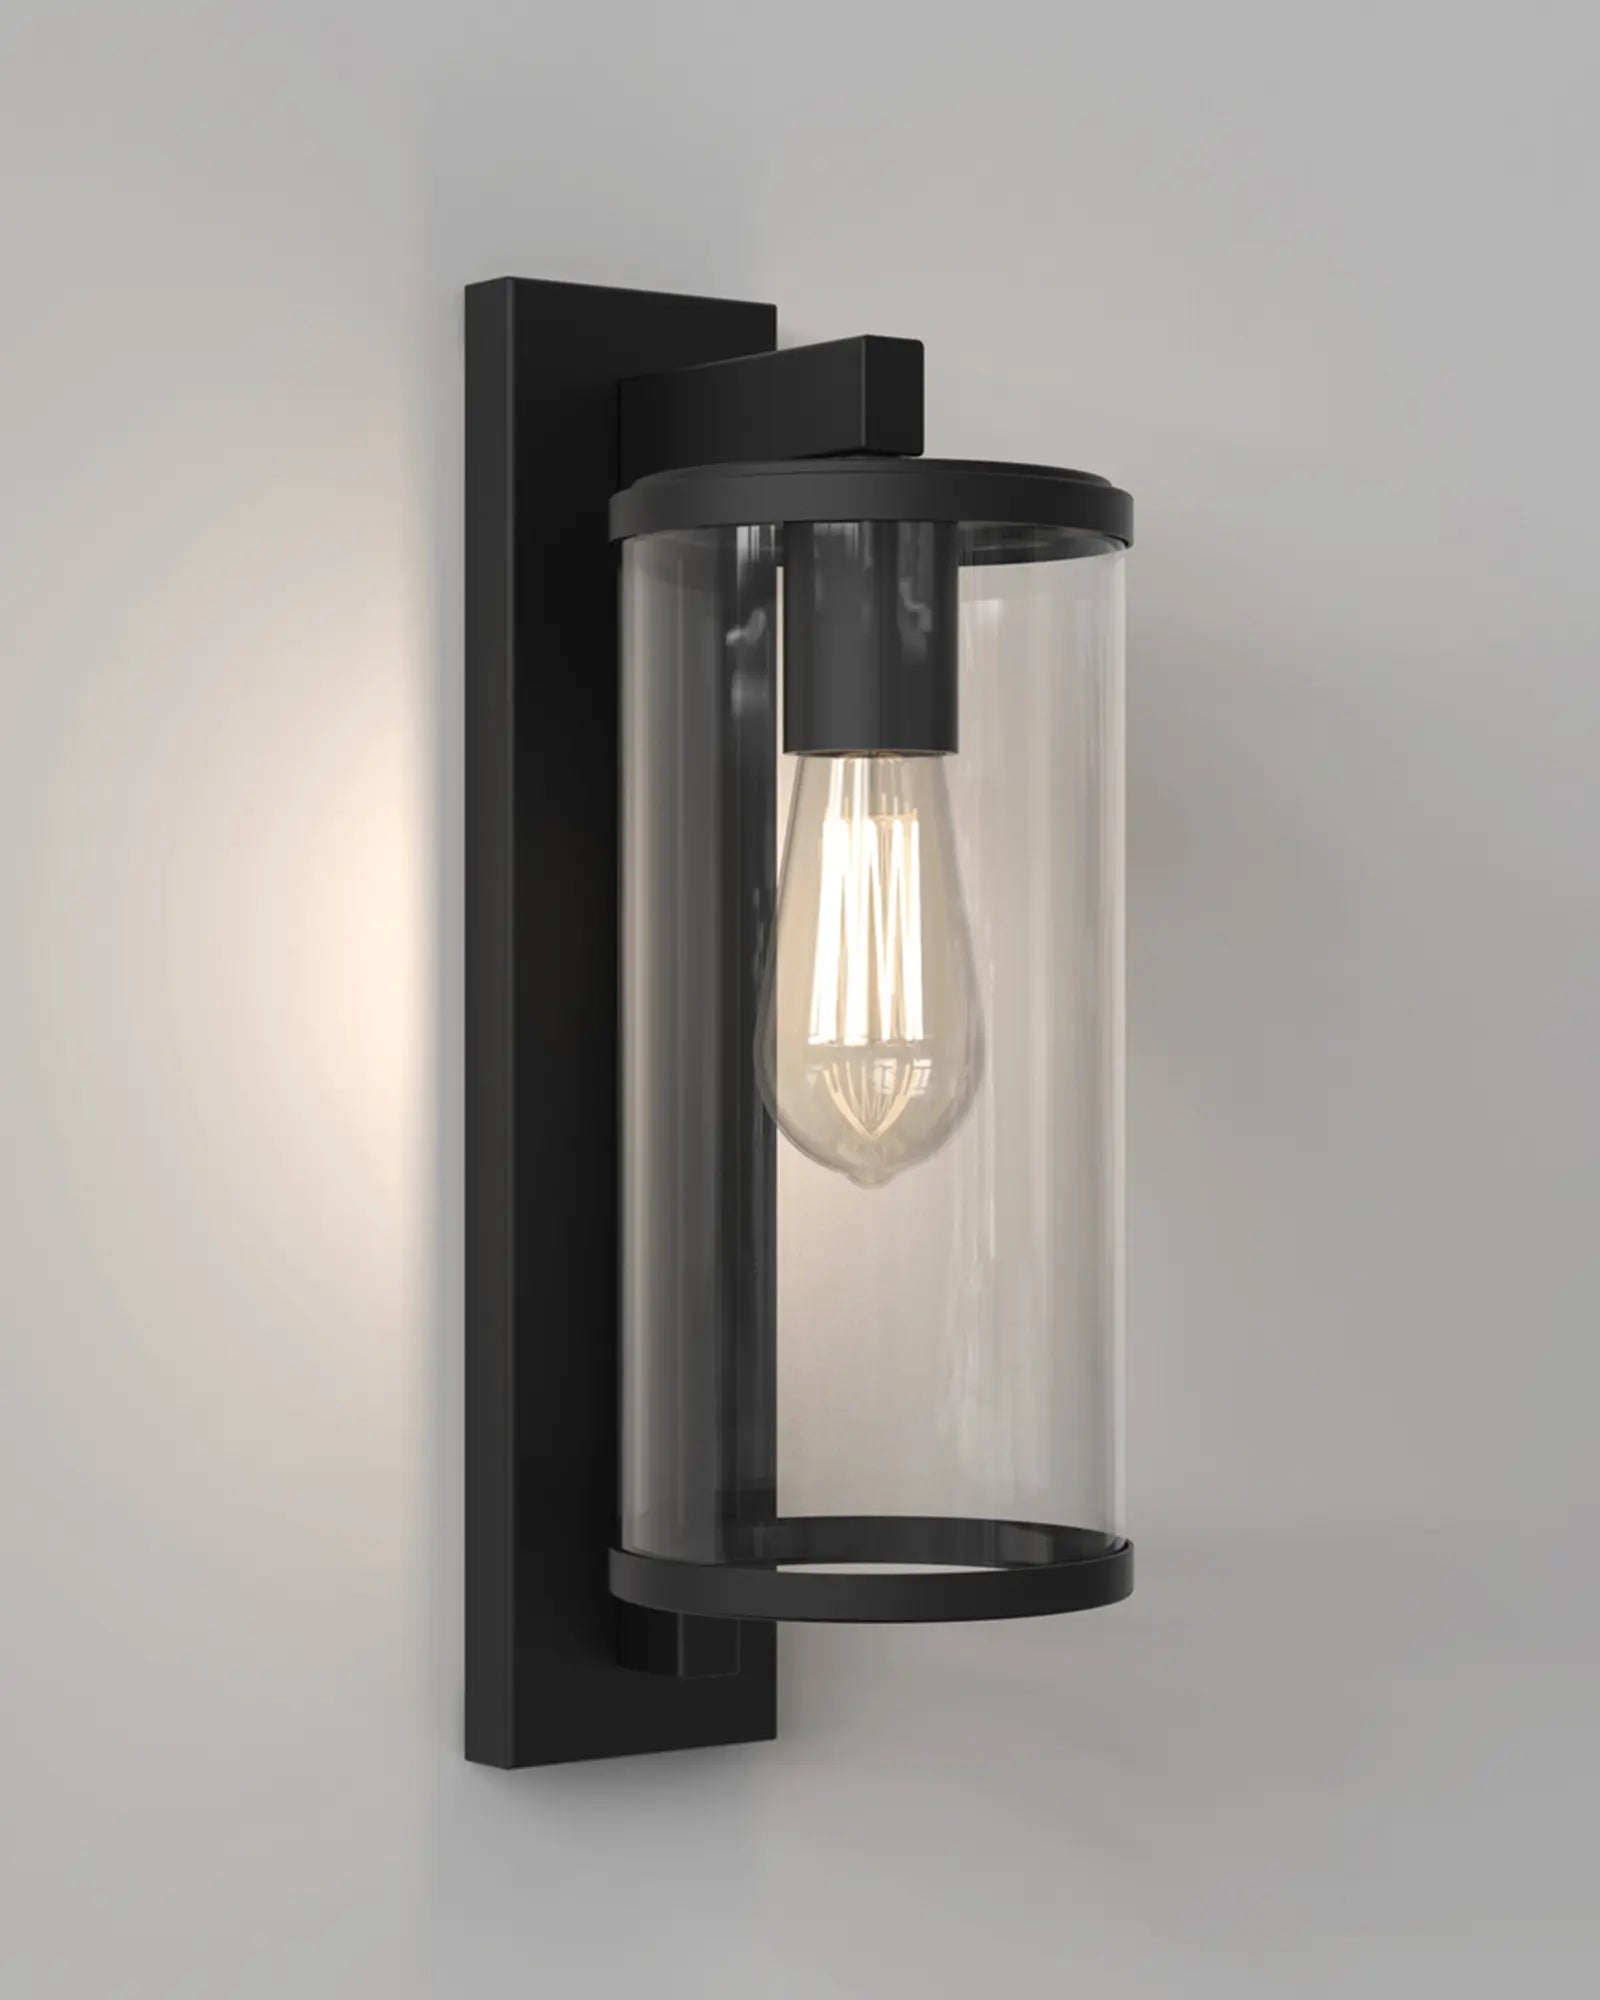 Pimlico Outdoor lantern style metal and glass wall light black 400